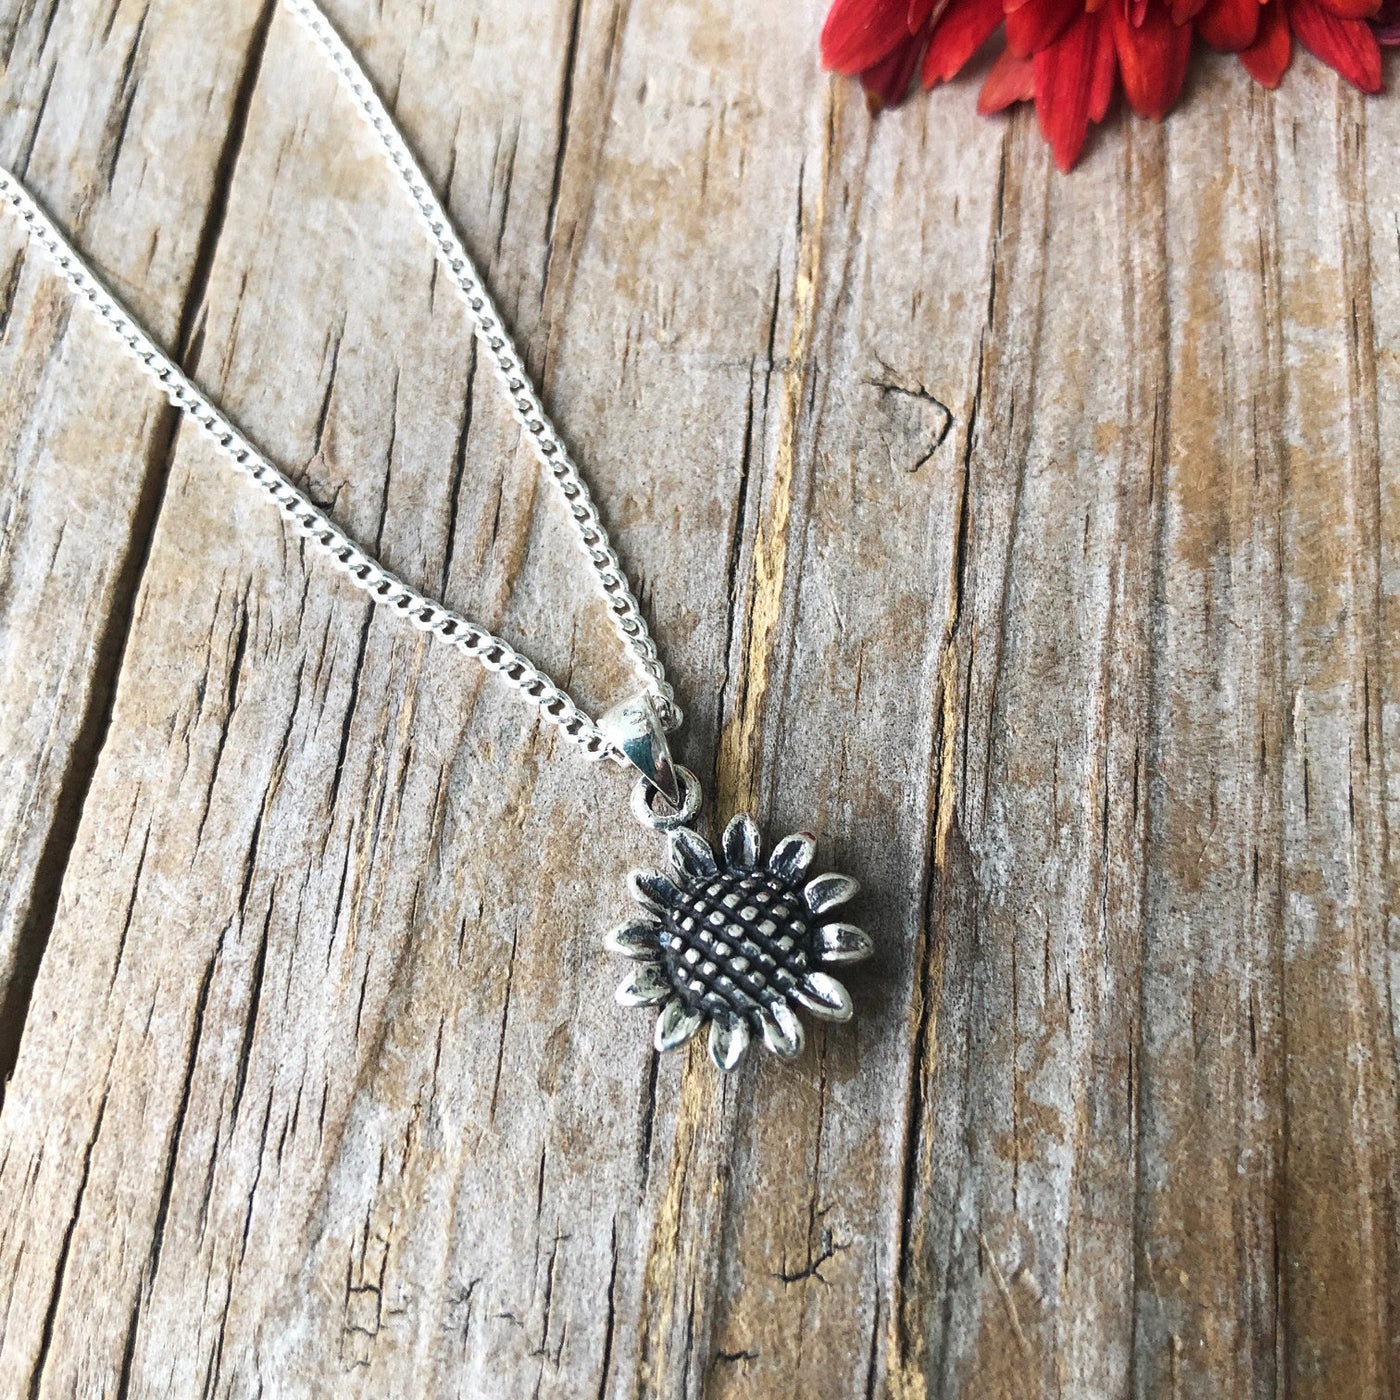 "Positivity & Happiness" Silver Sunflower Necklace